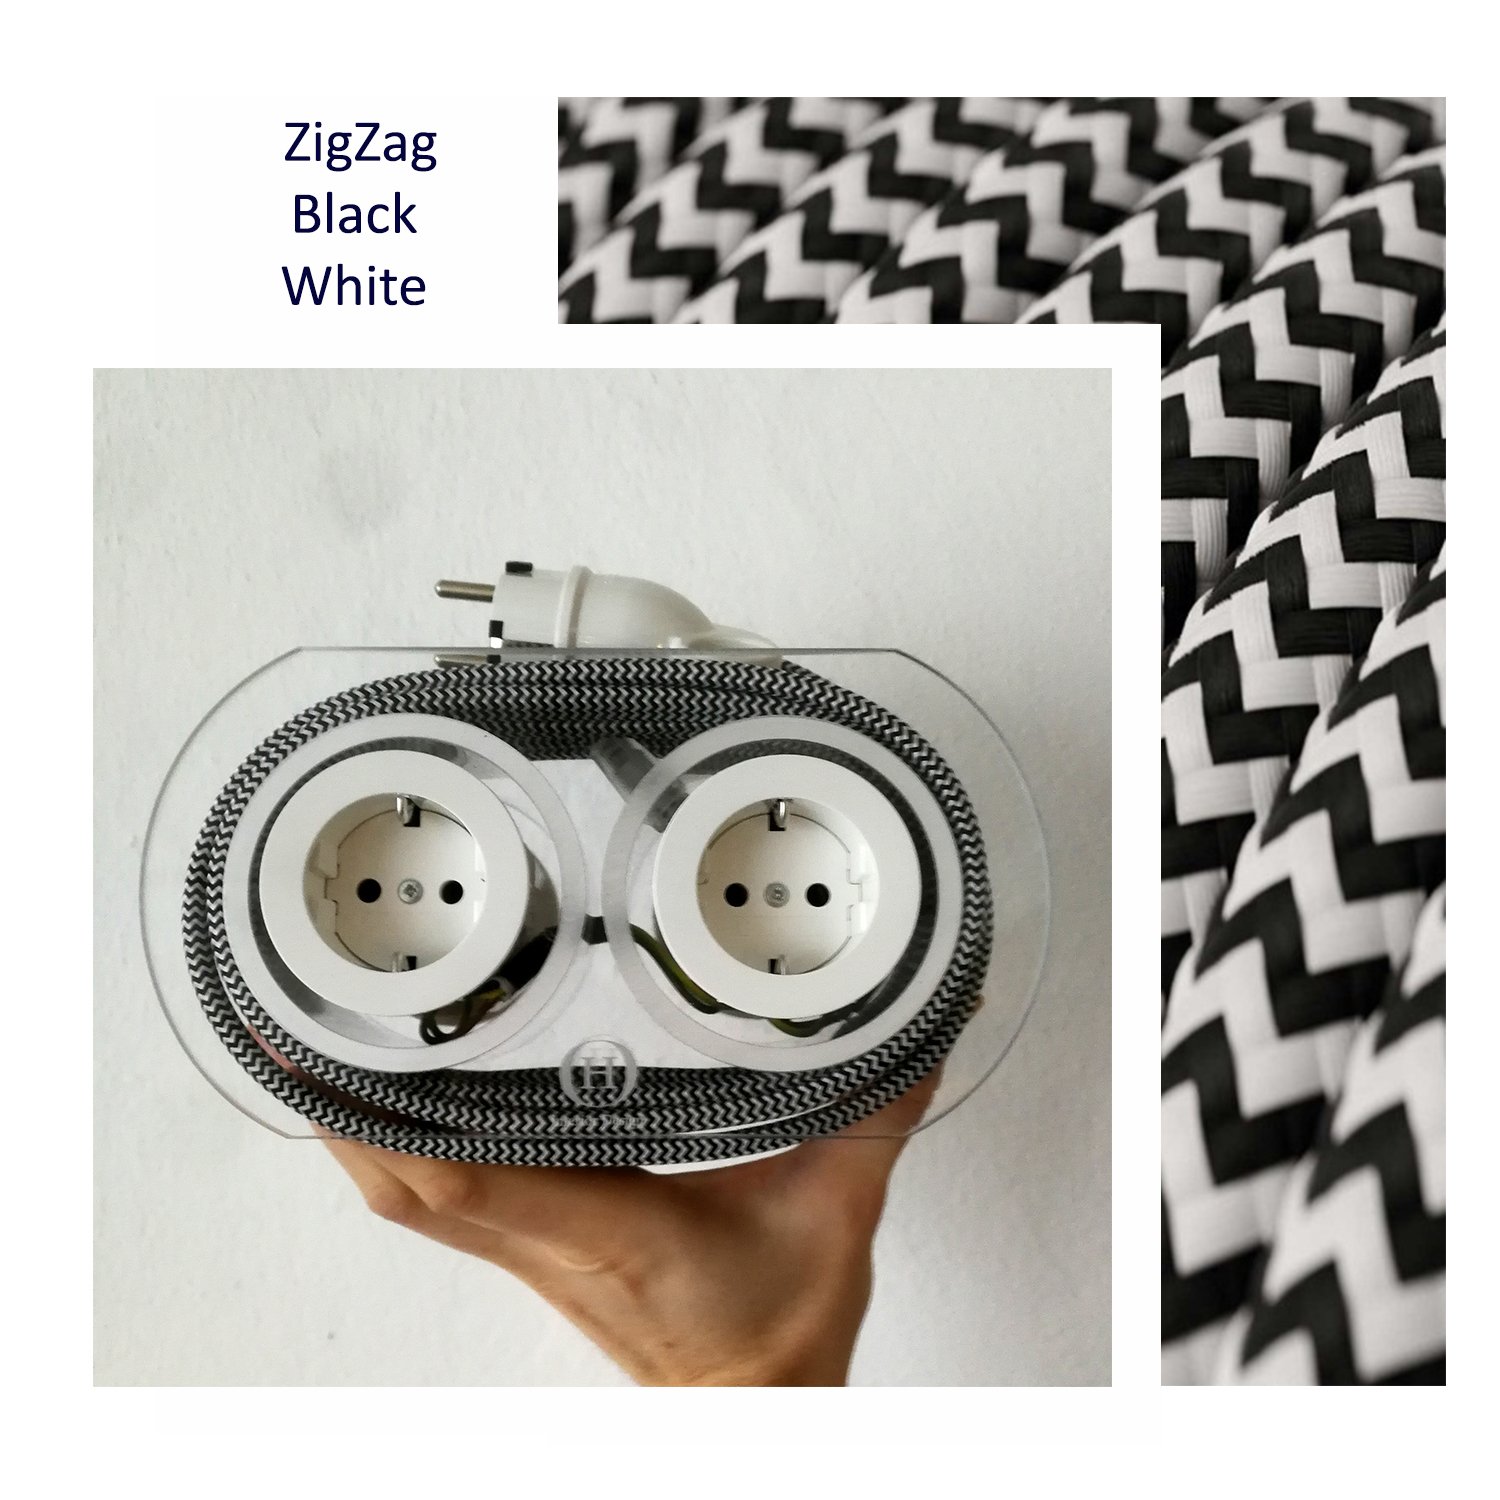 Extension Cord for 4 Plugs_ZigZag Black White_white plugs.jpg